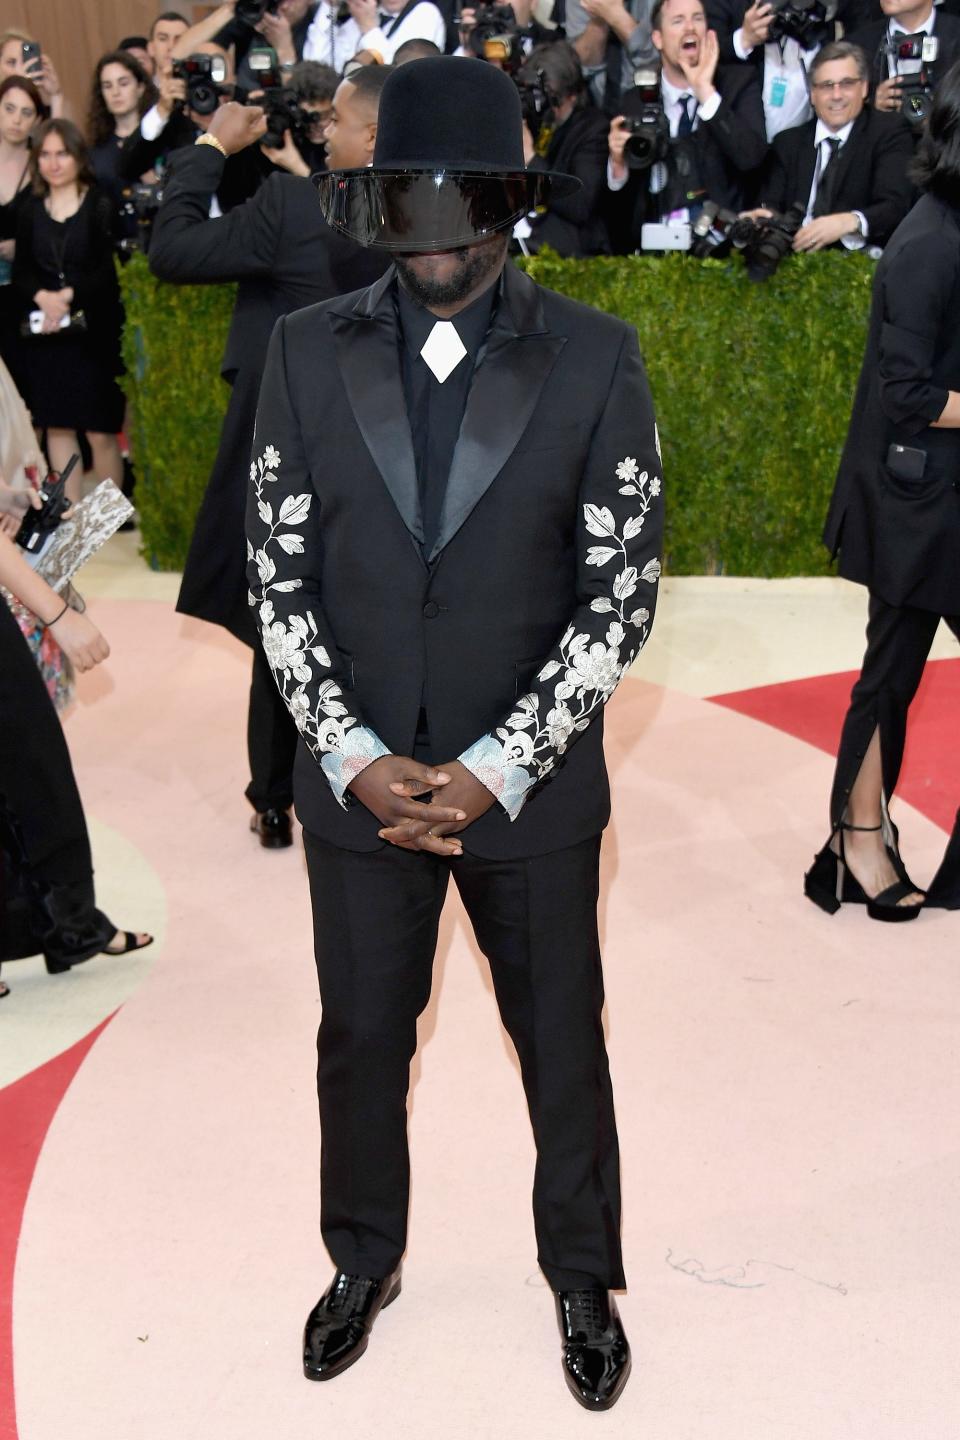 Will.i.am wears a hat and visor to the 2016 Met Gala.